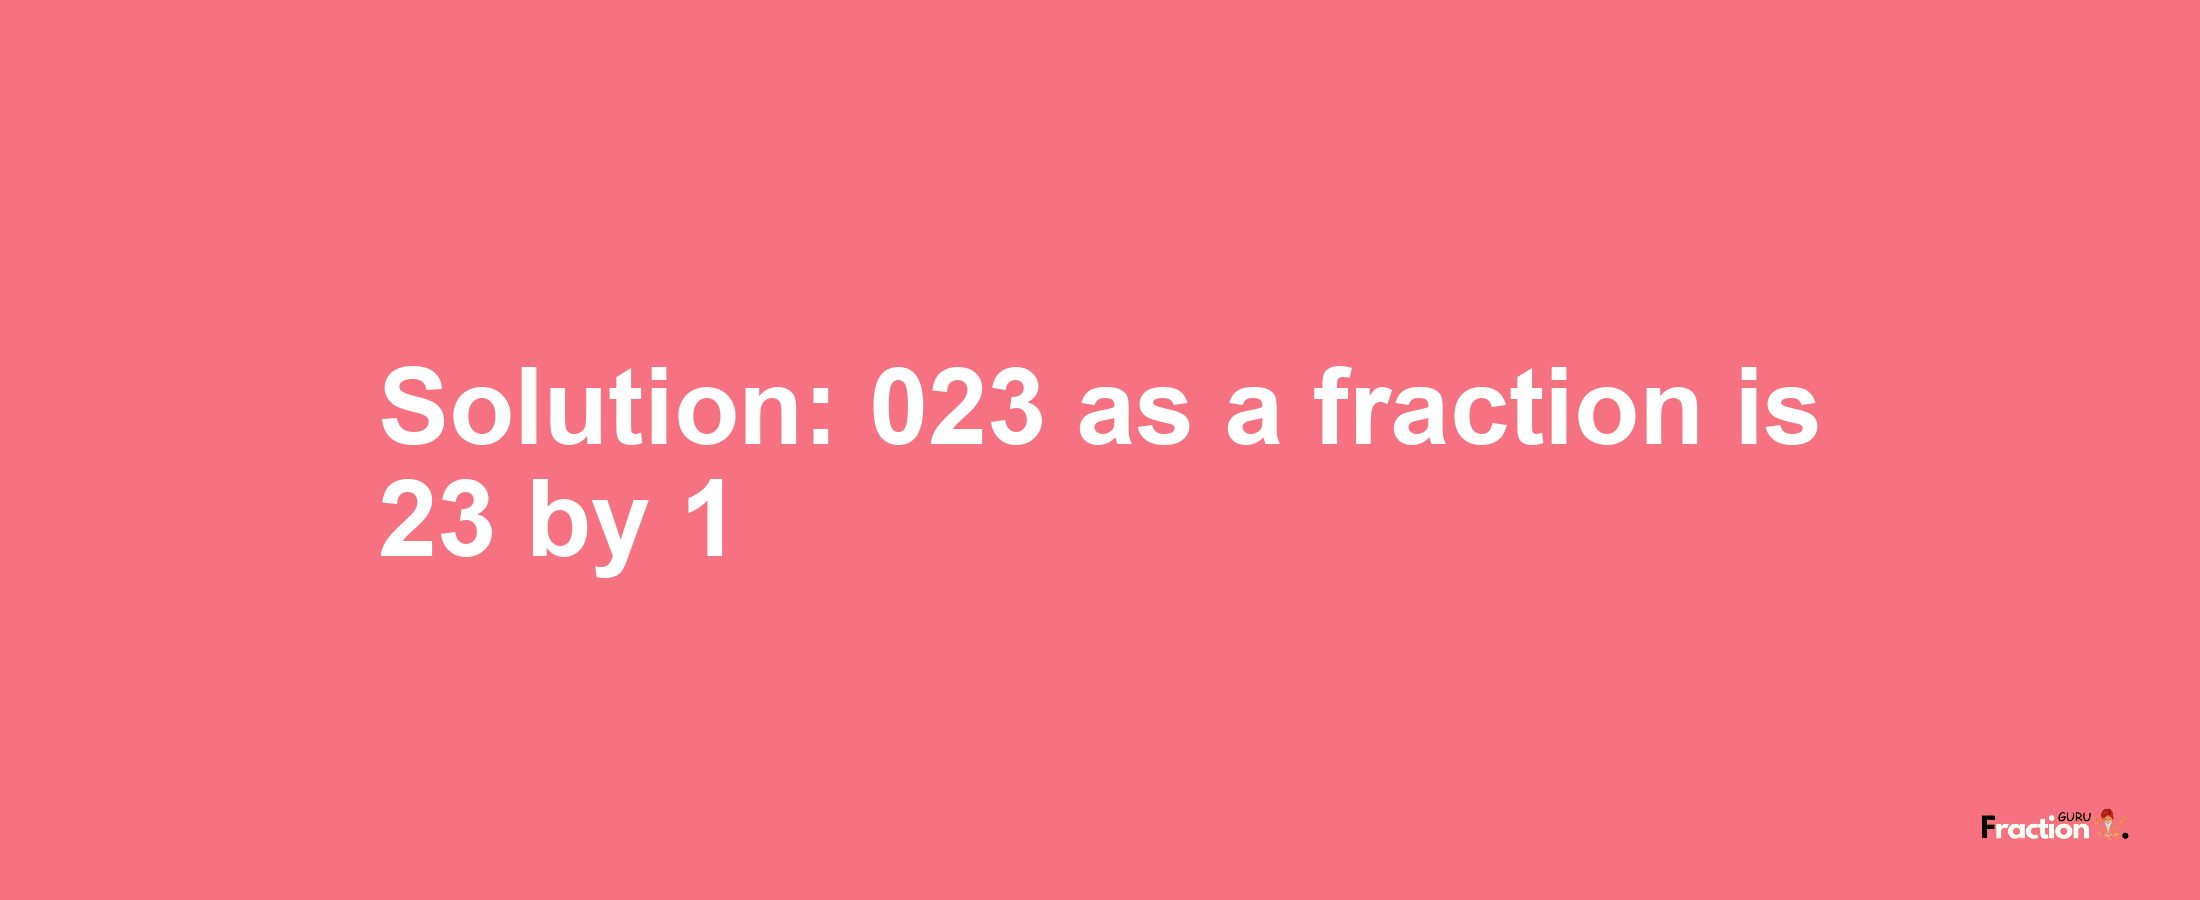 Solution:023 as a fraction is 23/1